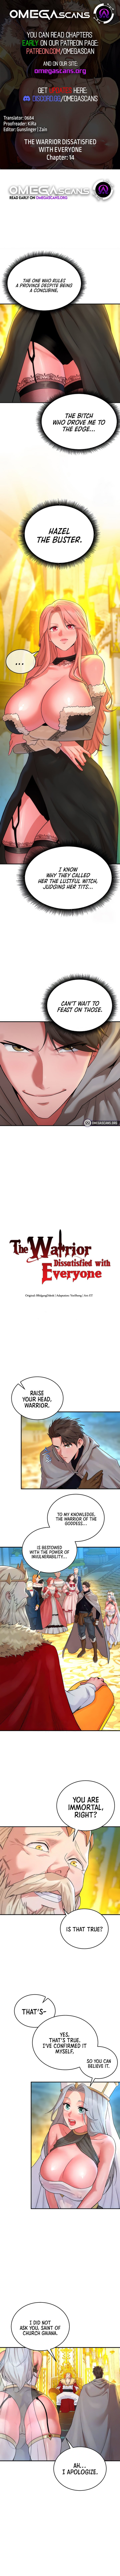 the-warrior-dissatisfied-with-everyone-chap-14-0